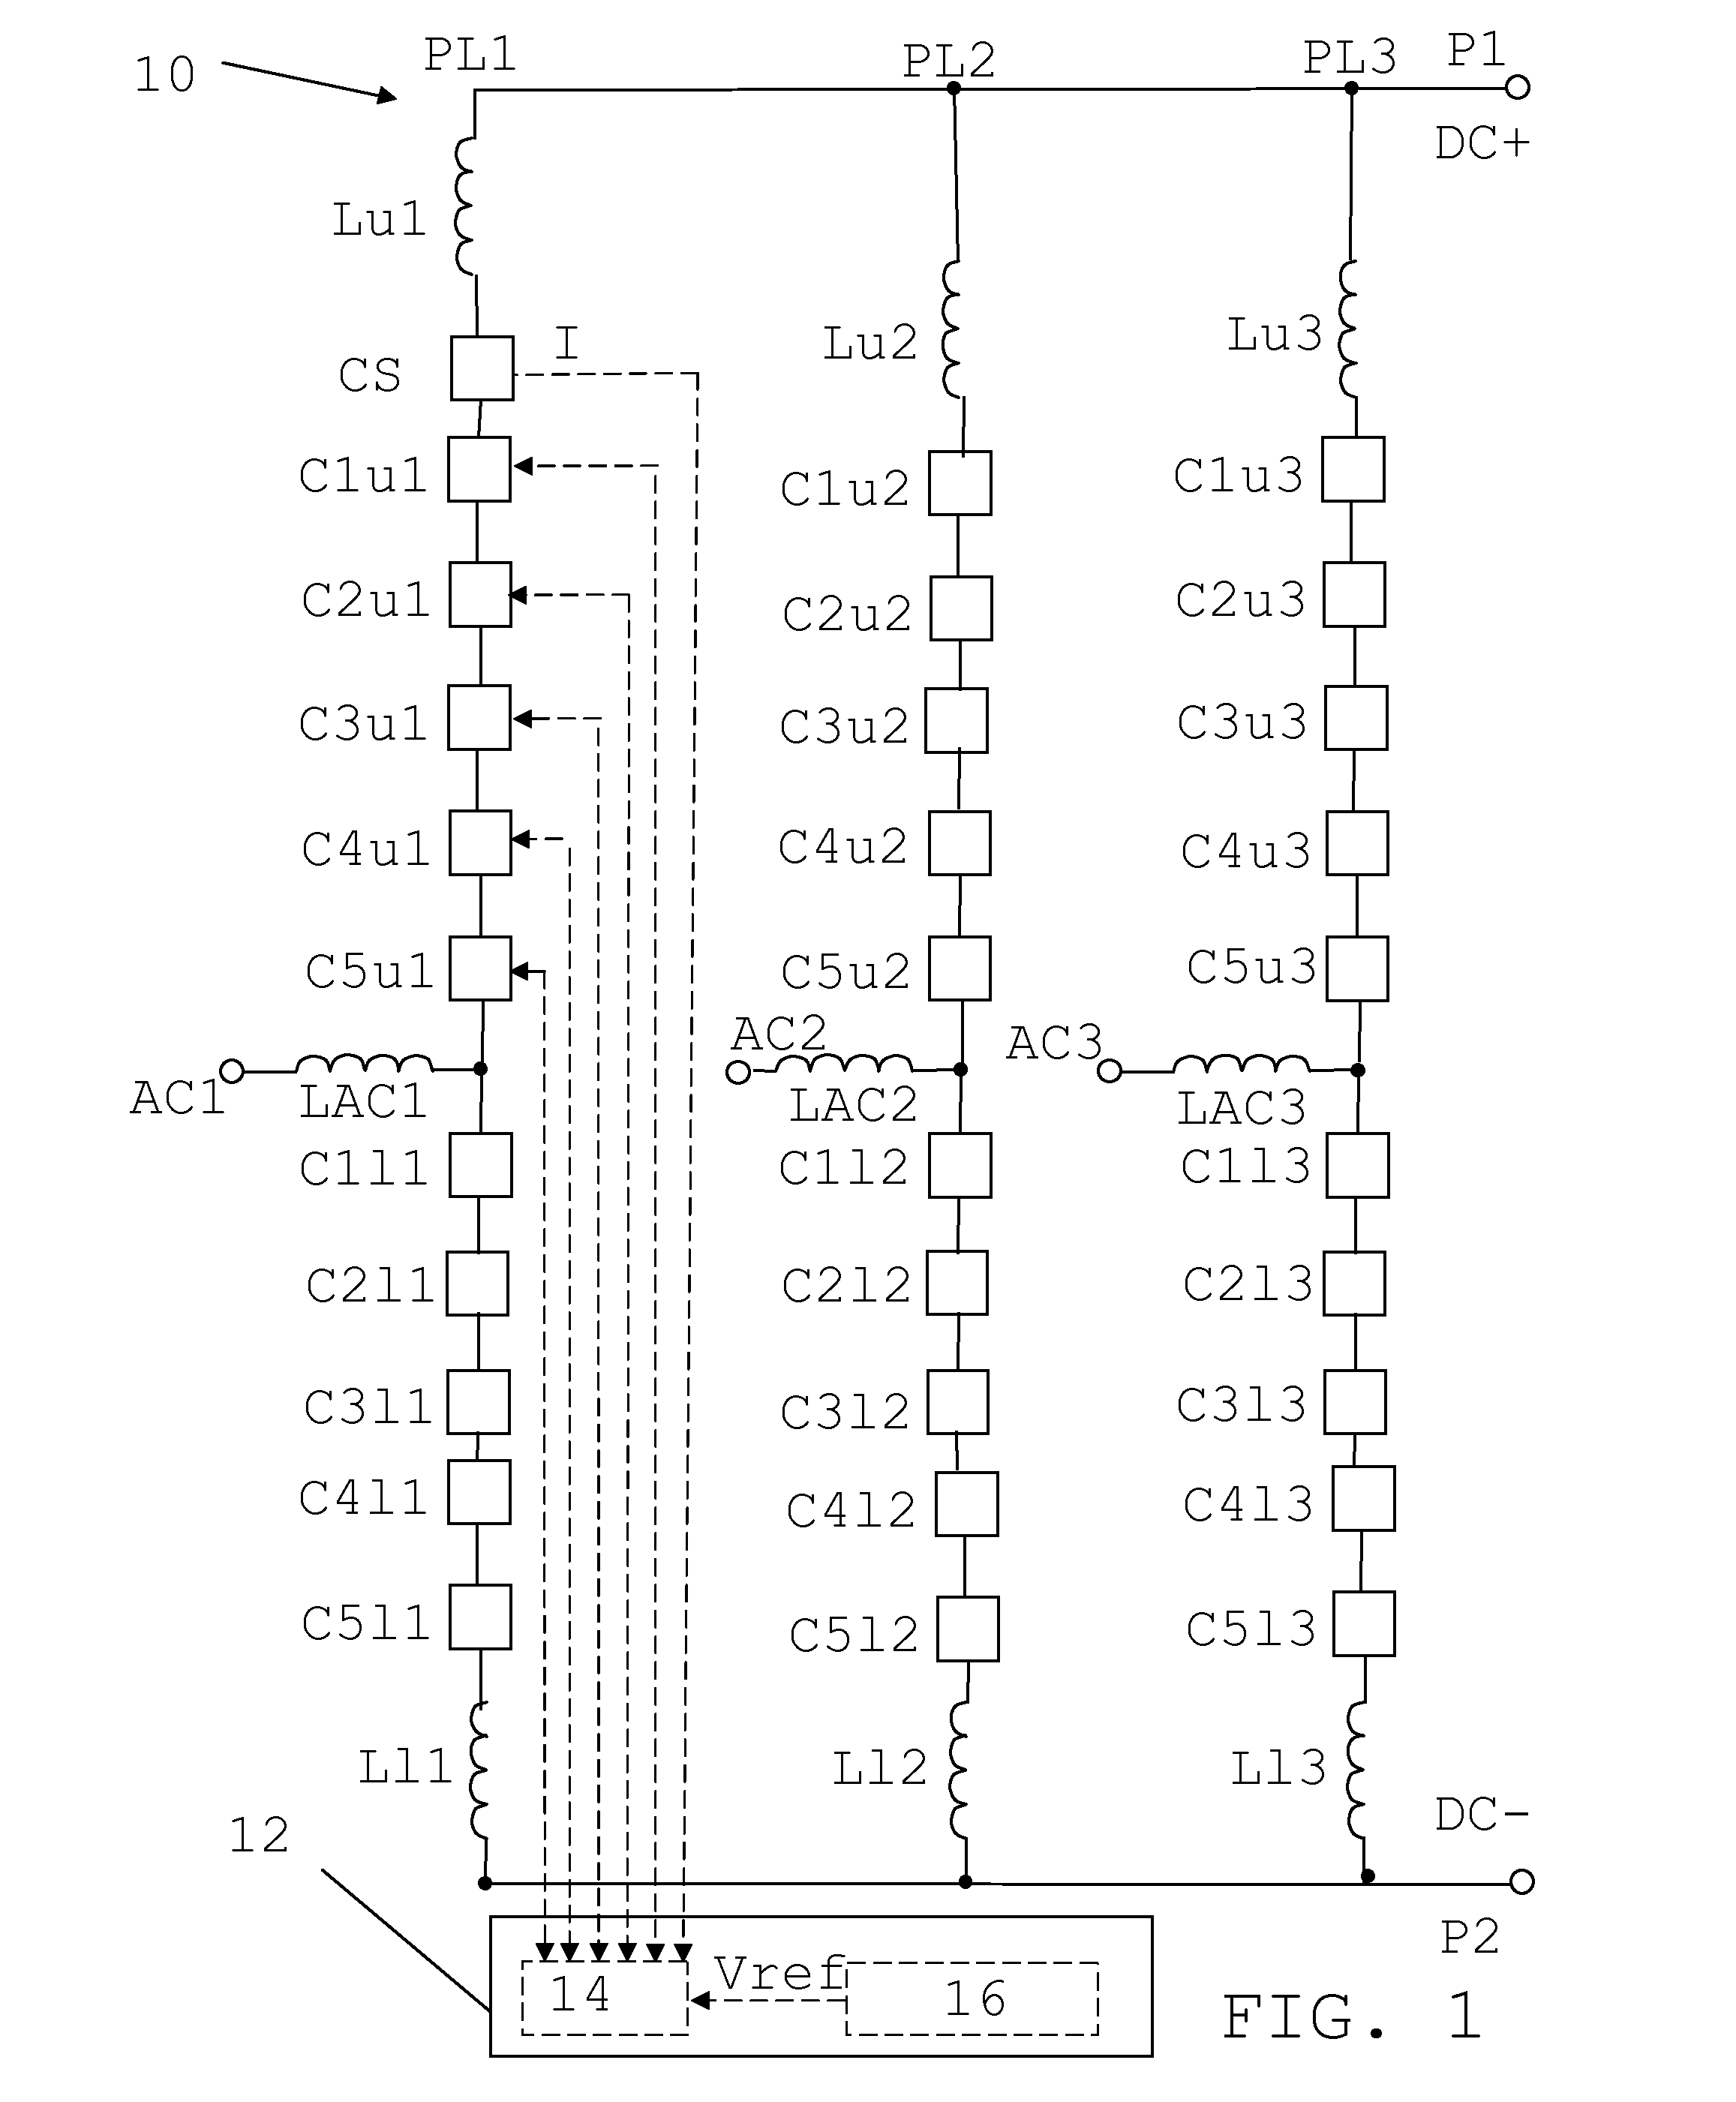 Multilevel converter with cells being selected based on phase arm current